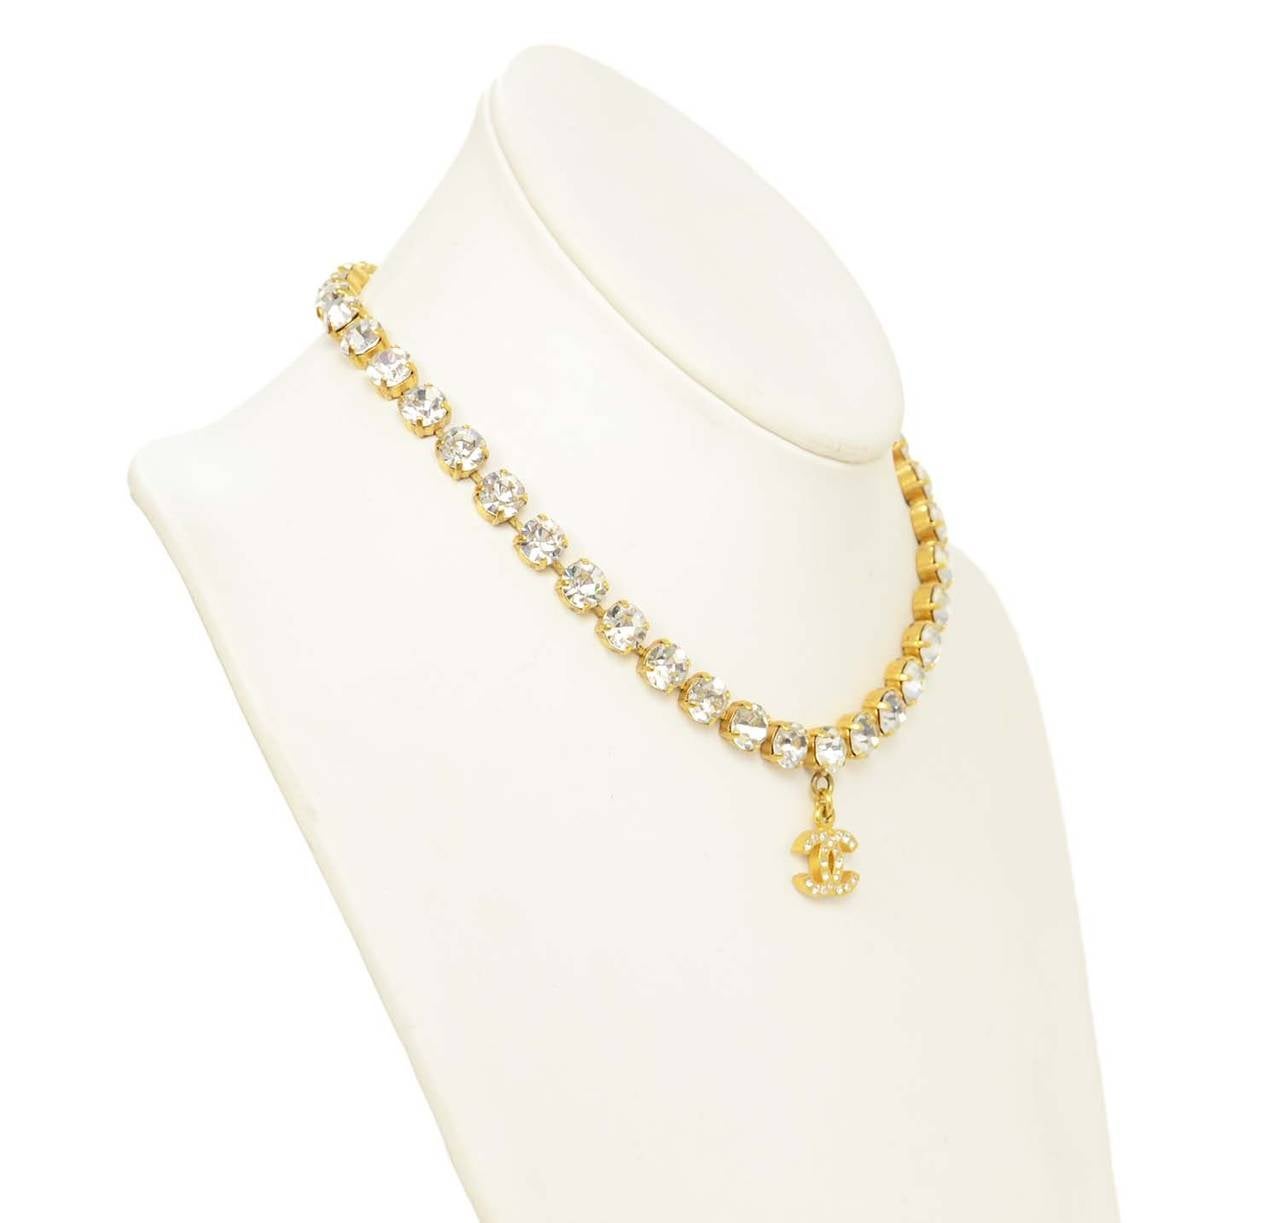 Chanel Vintage 1996 Goldtone & Rhinestone Necklace w/CC Pendant
Features double-sided rhinestone detailing on CC pendant

    Made in: France
    Year of Production: 1996
    Stamp: 96 CC A
    Closure: Hook and eye
    Color: Goldtone
   